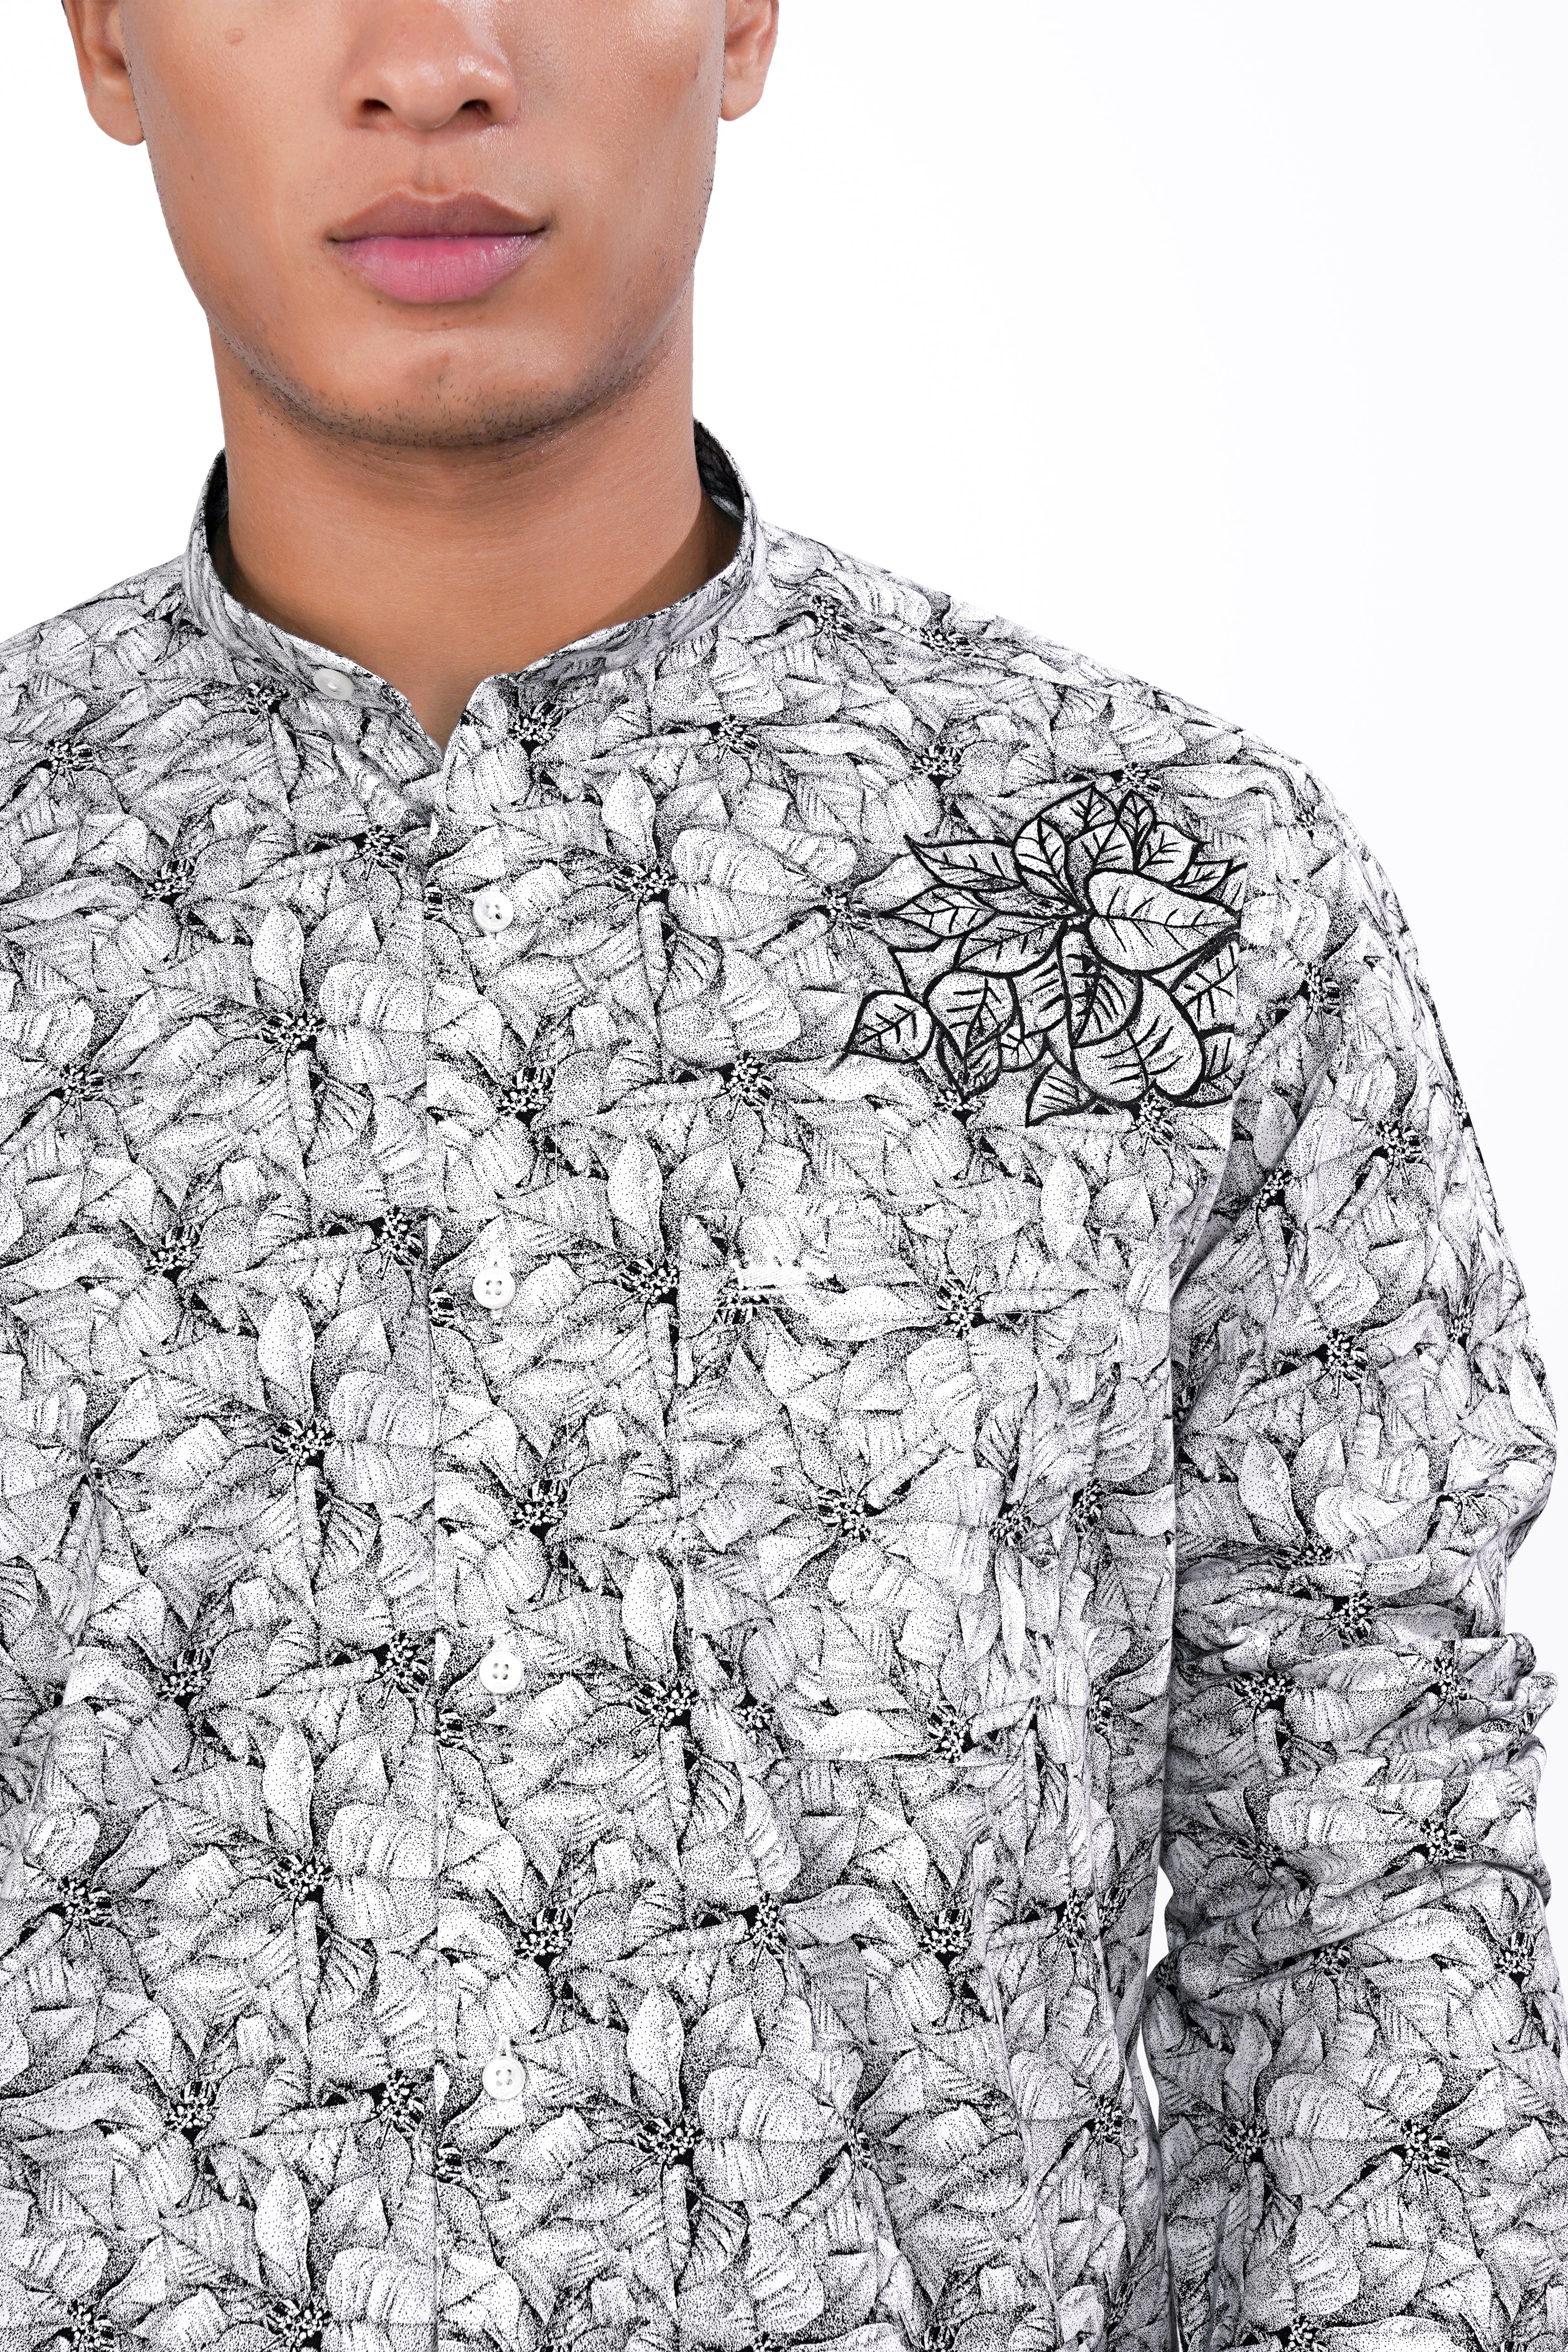 Jade Black and white Floral Printed with Hand Painted Twill Premium Cotton Designer Shirt 6254-M-ART02-38, 6254-M-ART02-H-38, 6254-M-ART02-39, 6254-M-ART02-H-39, 6254-M-ART02-40, 6254-M-ART02-H-40, 6254-M-ART02-42, 6254-M-ART02-H-42, 6254-M-ART02-44, 6254-M-ART02-H-44, 6254-M-ART02-46, 6254-M-ART02-H-46, 6254-M-ART02-48, 6254-M-ART02-H-48, 6254-M-ART02-50, 6254-M-ART02-H-50, 6254-M-ART02-52, 6254-M-ART02-H-52